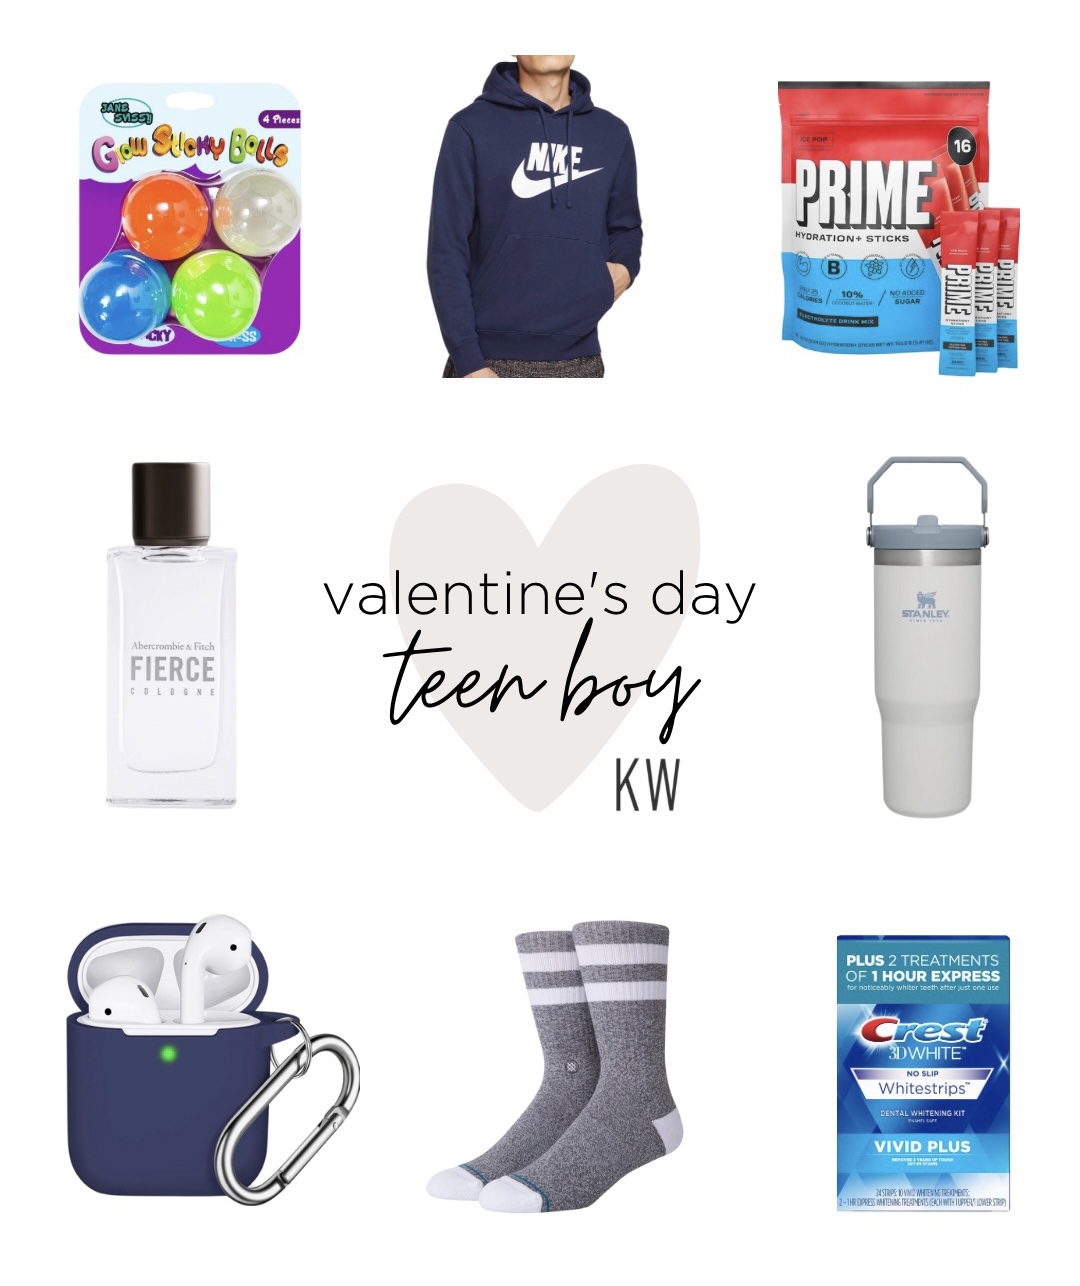 Valentine's Gifts for Teens: Boys